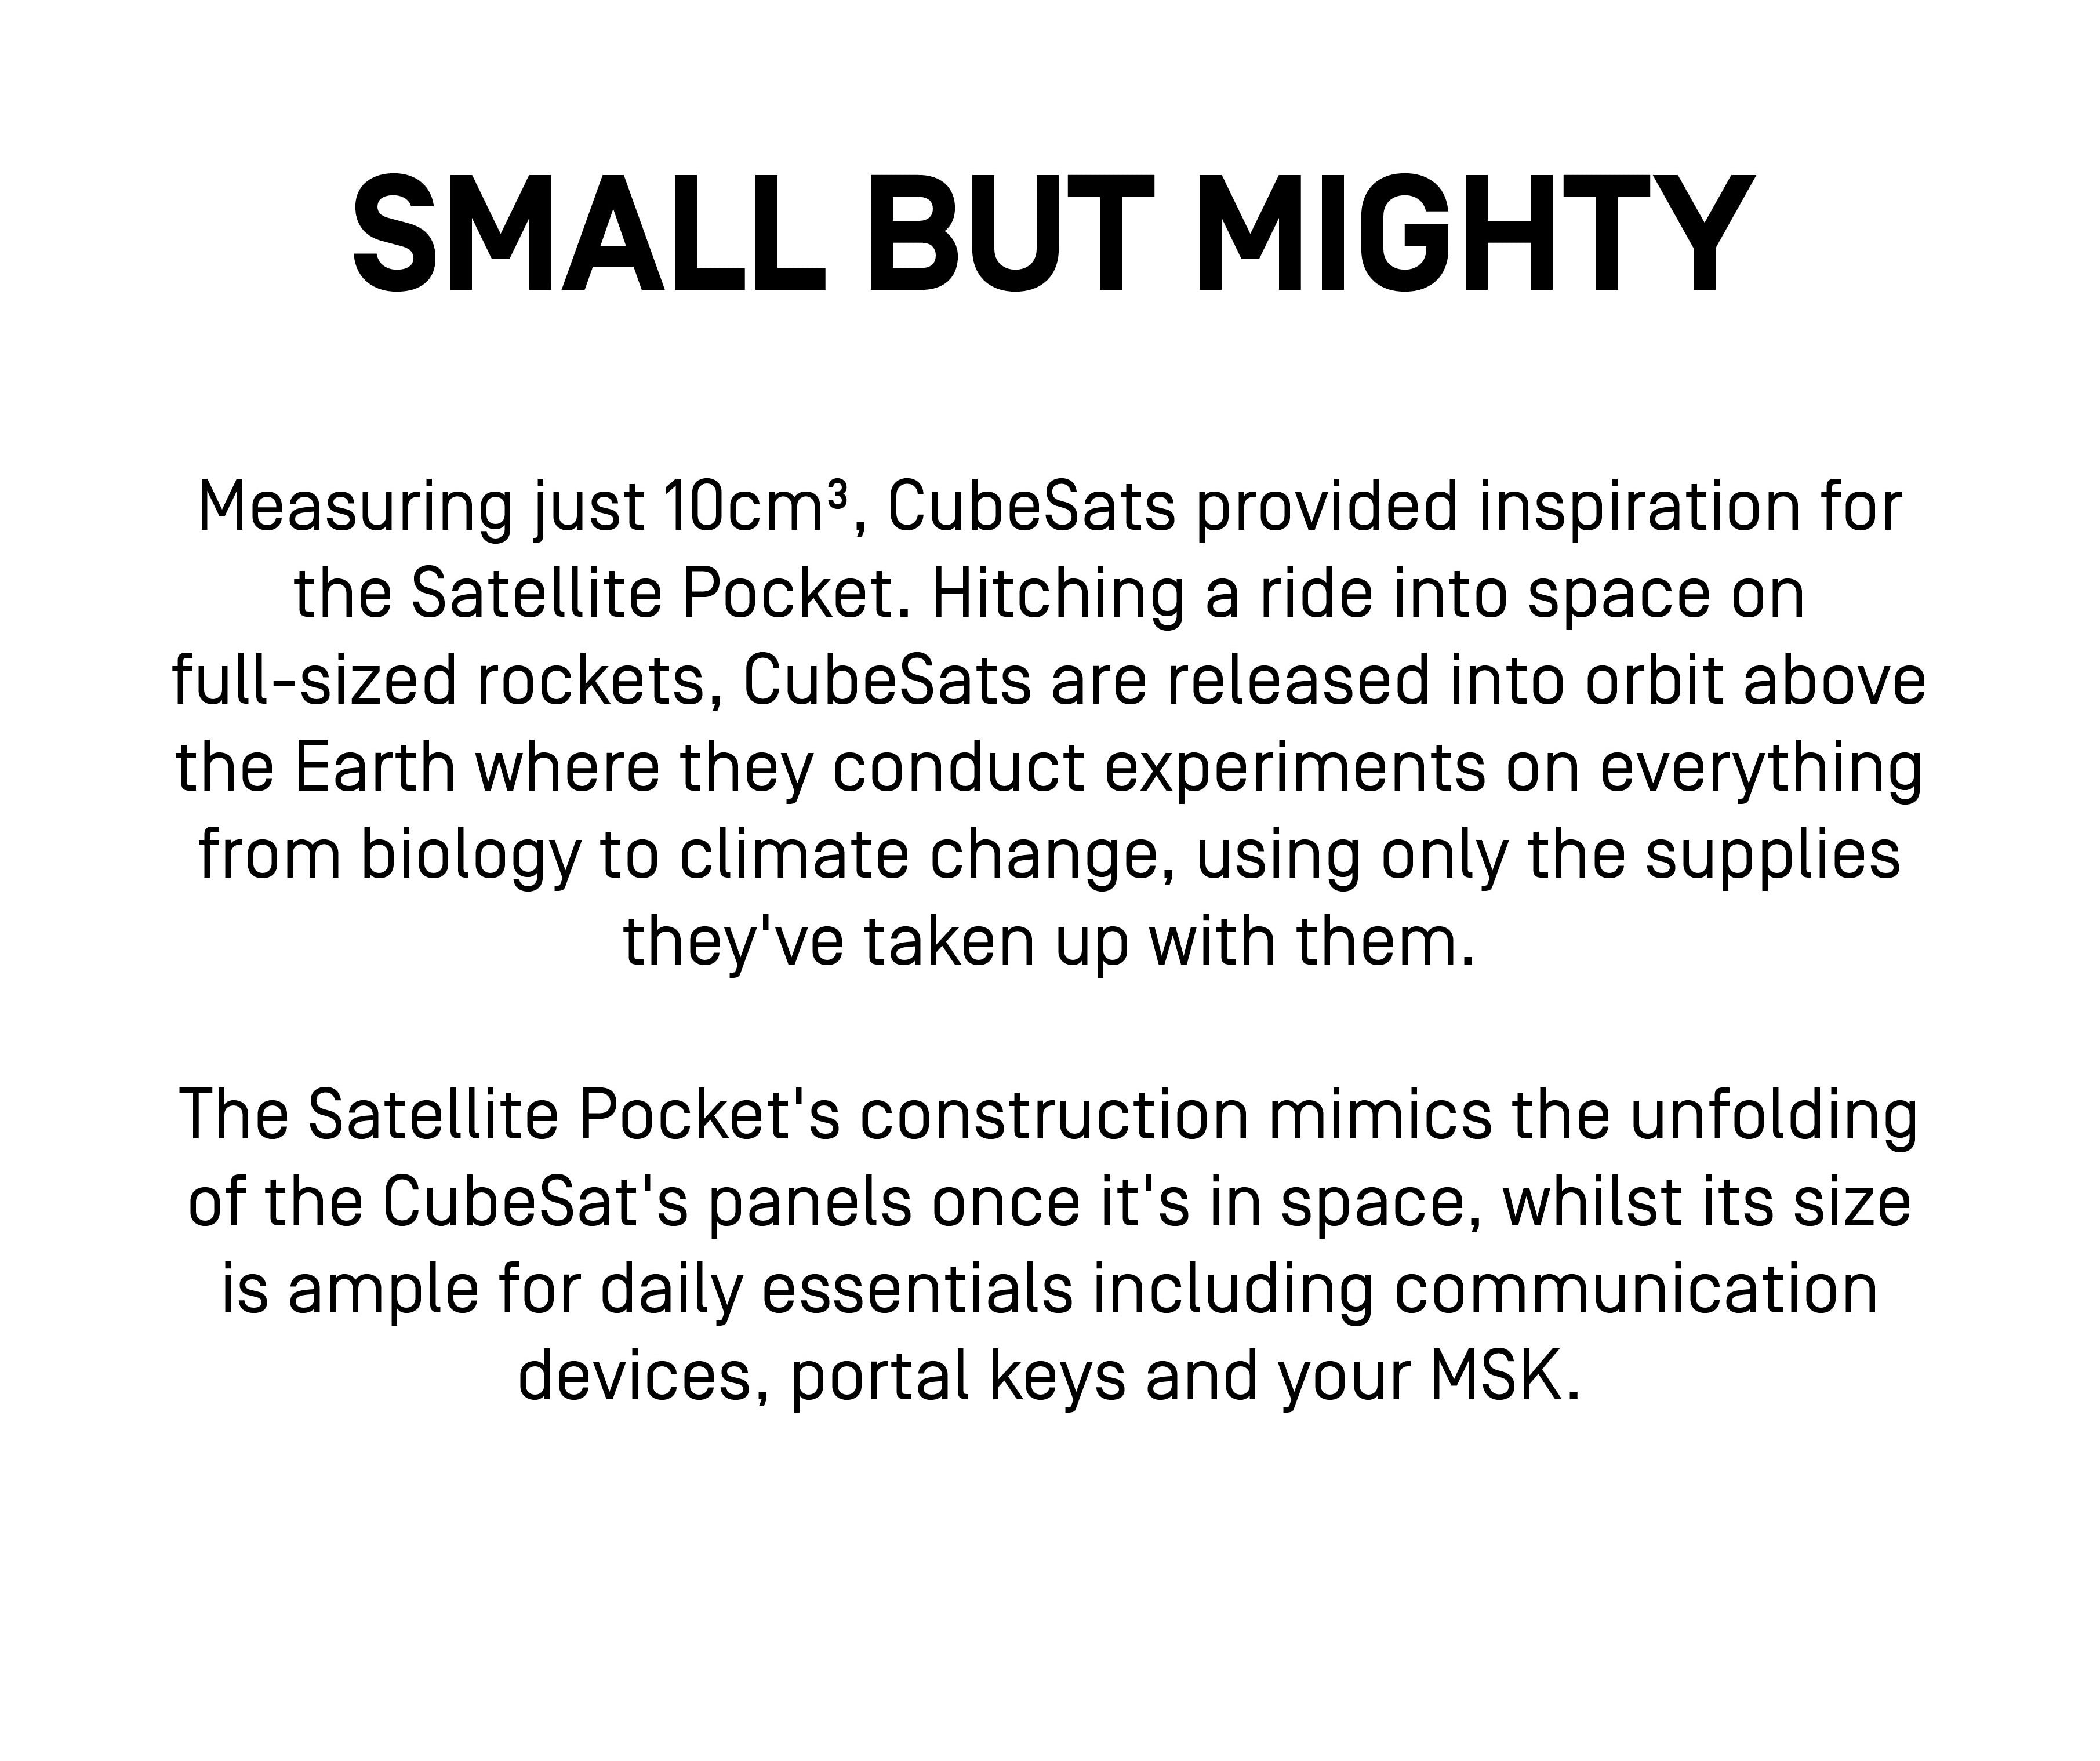 SMALL BUT MIGHTY
Measuring just 10cm^3, CubeSats provided inspiration for the Satellite Pocket. Hitching a ride into space on full-sized rockets, CubeSats are released into orbit above the Earth where they conduct experiments on everything from biology to climate change, using only the supplies they've taken up with them.
The Satellite Pocket's construction mimics the unfolding of the CubeSat's panels once it's in space, whilst its size is ample for daily essentials including communication devices, portal keys and your MSK.
